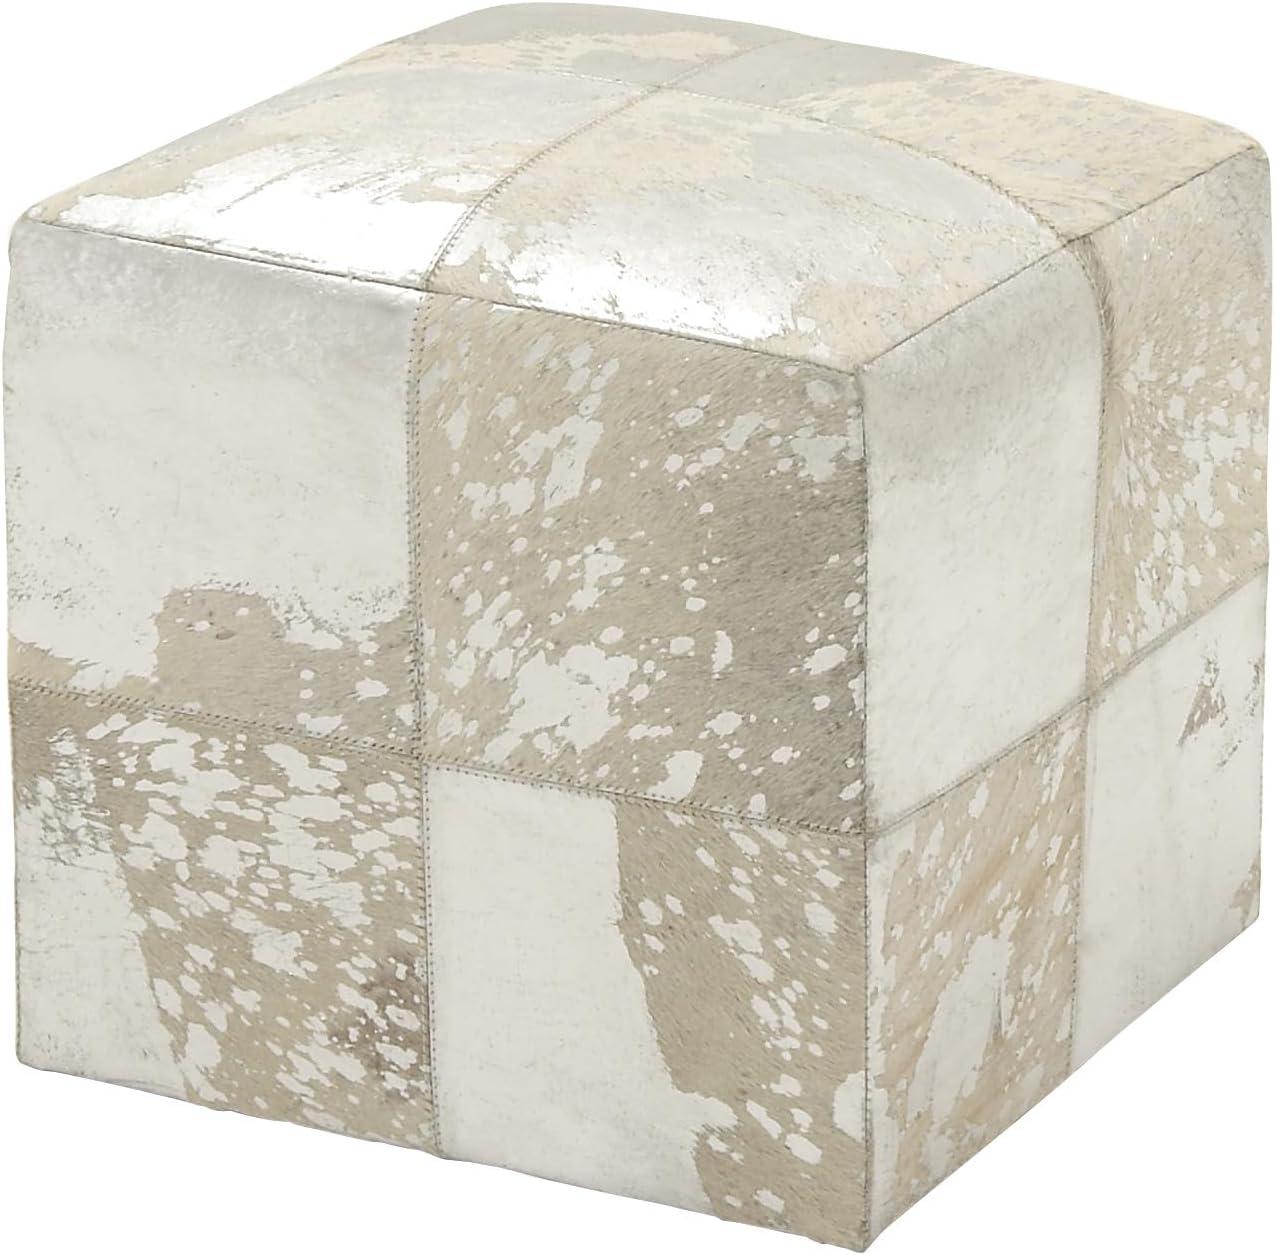 Elegance Unleashed White Leather Pouf with Silver Accents, 16"x17"